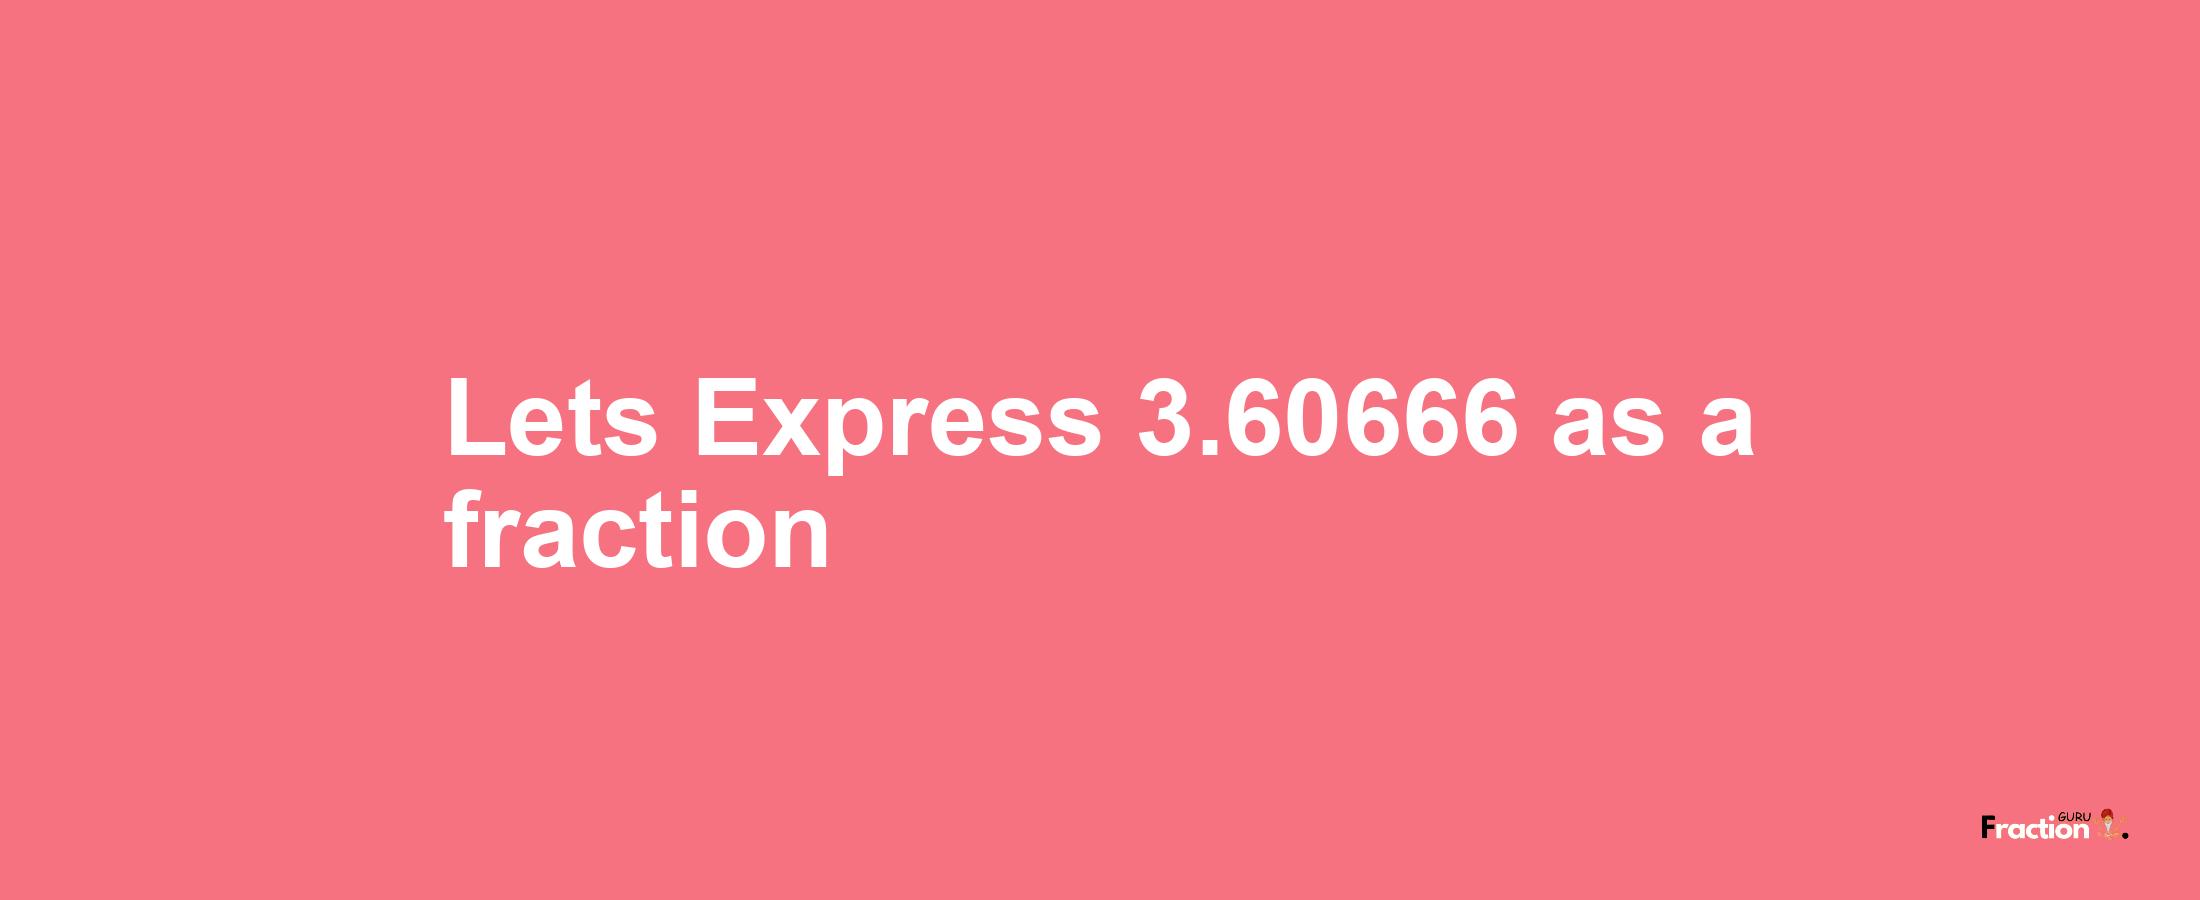 Lets Express 3.60666 as afraction